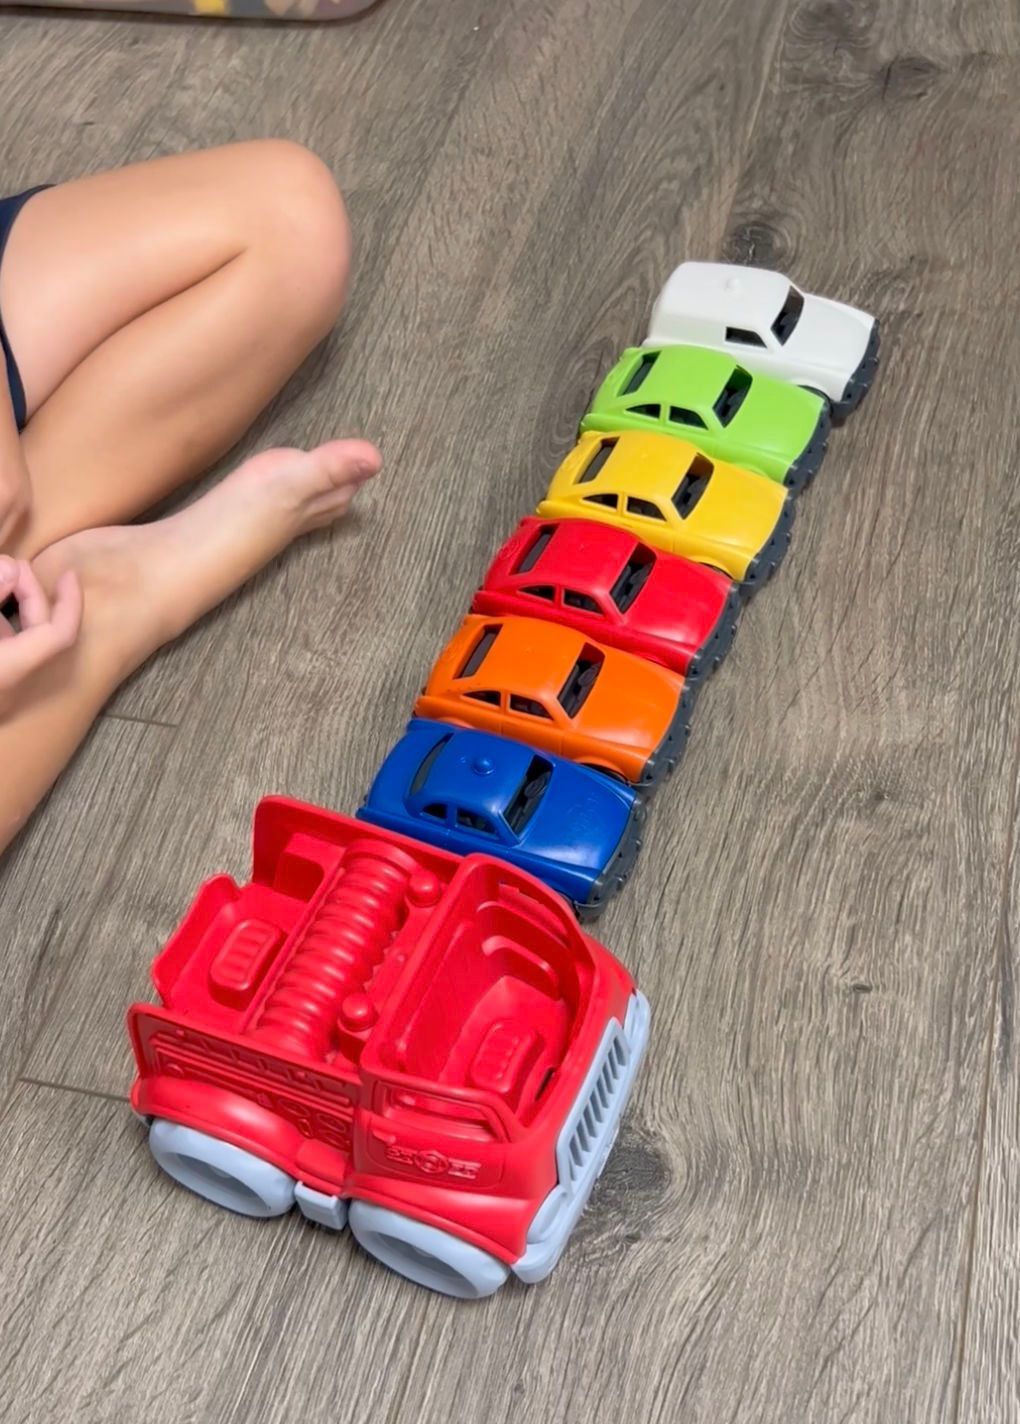 A child is playing with a row of toy cars on the floor